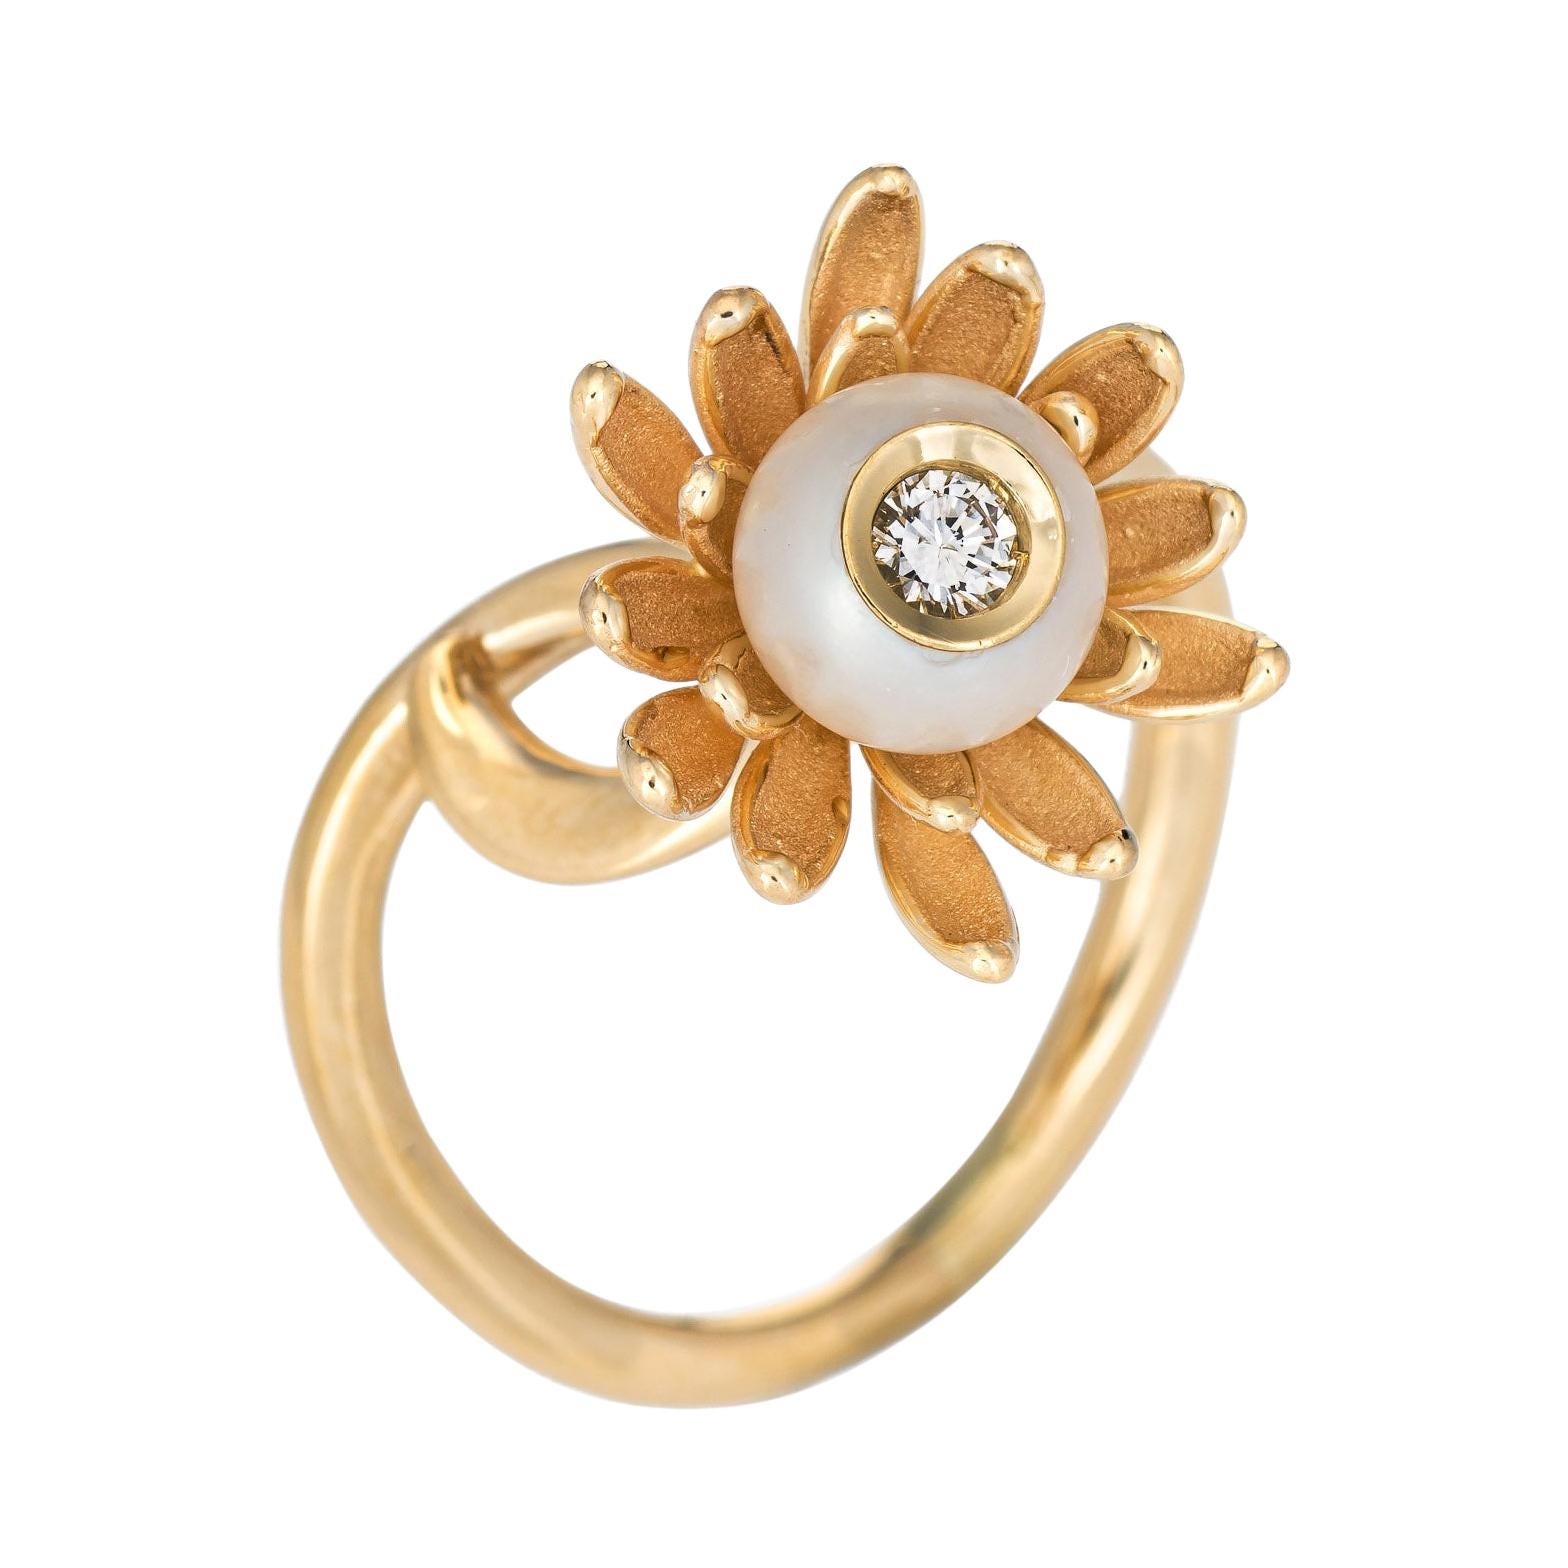 Diamond in Pearl Flower Ring Vintage 14k Yellow Gold Estate Fine Jewelry